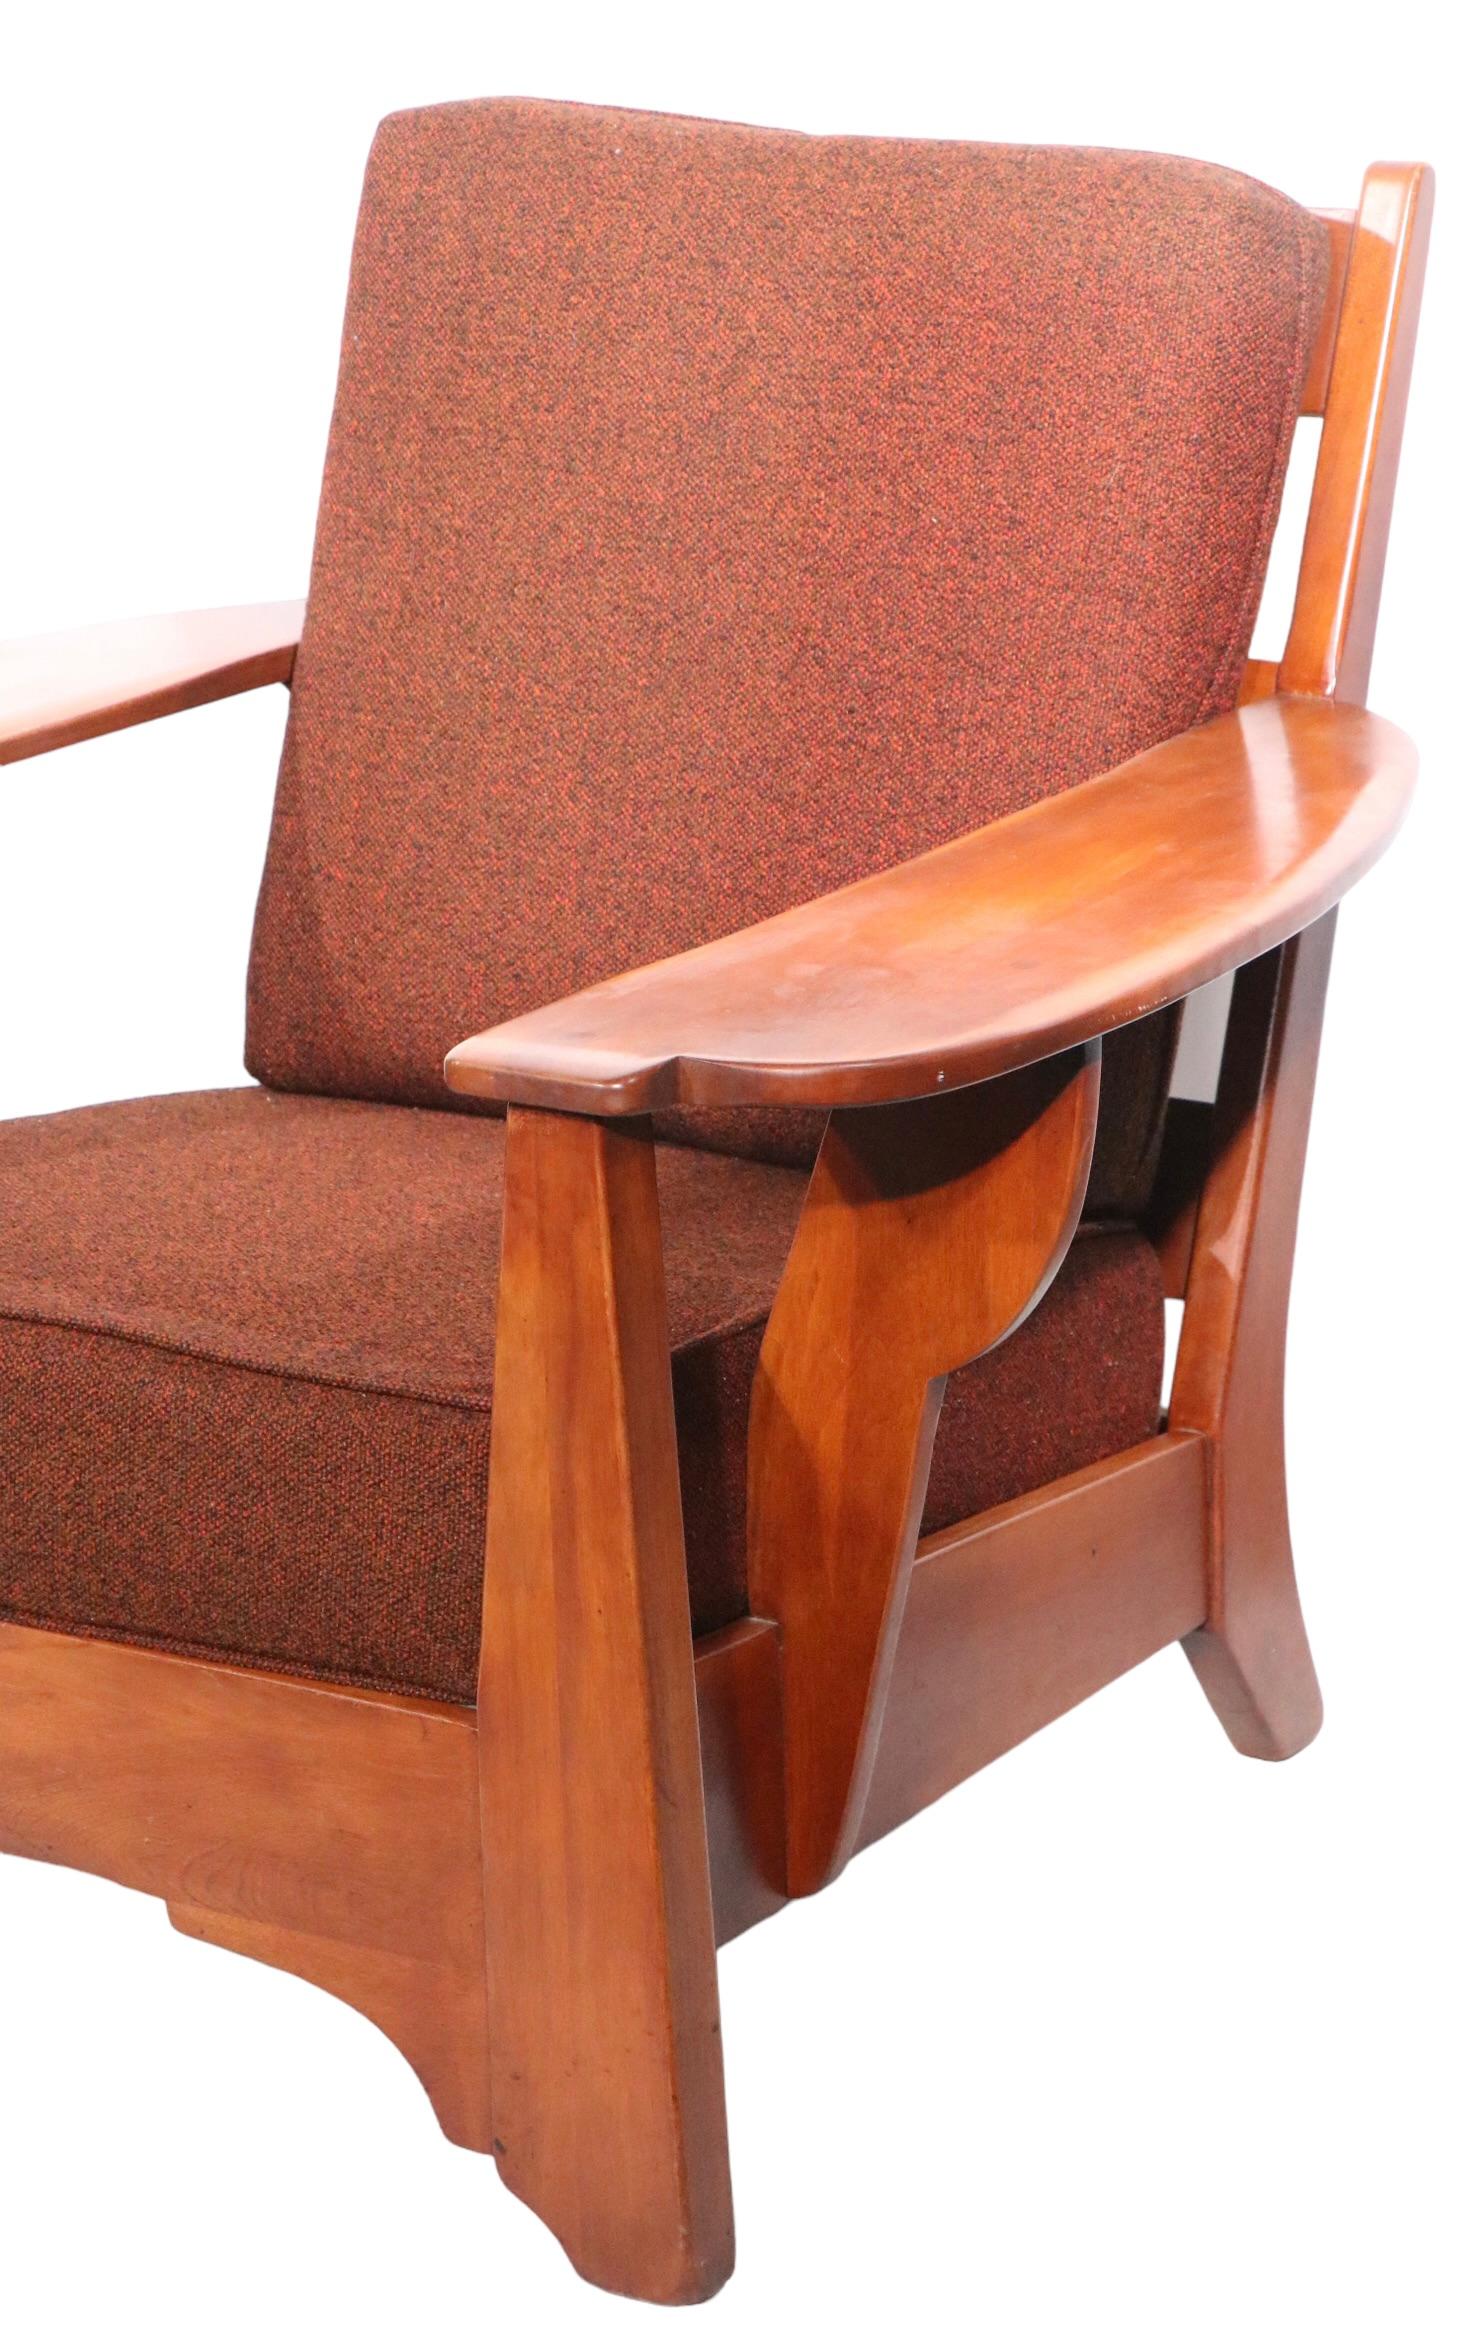 20th Century Pr. Paddle Arm Lounge Chairs by Herman de Vries for Cushman Colonial, c 1940-50s